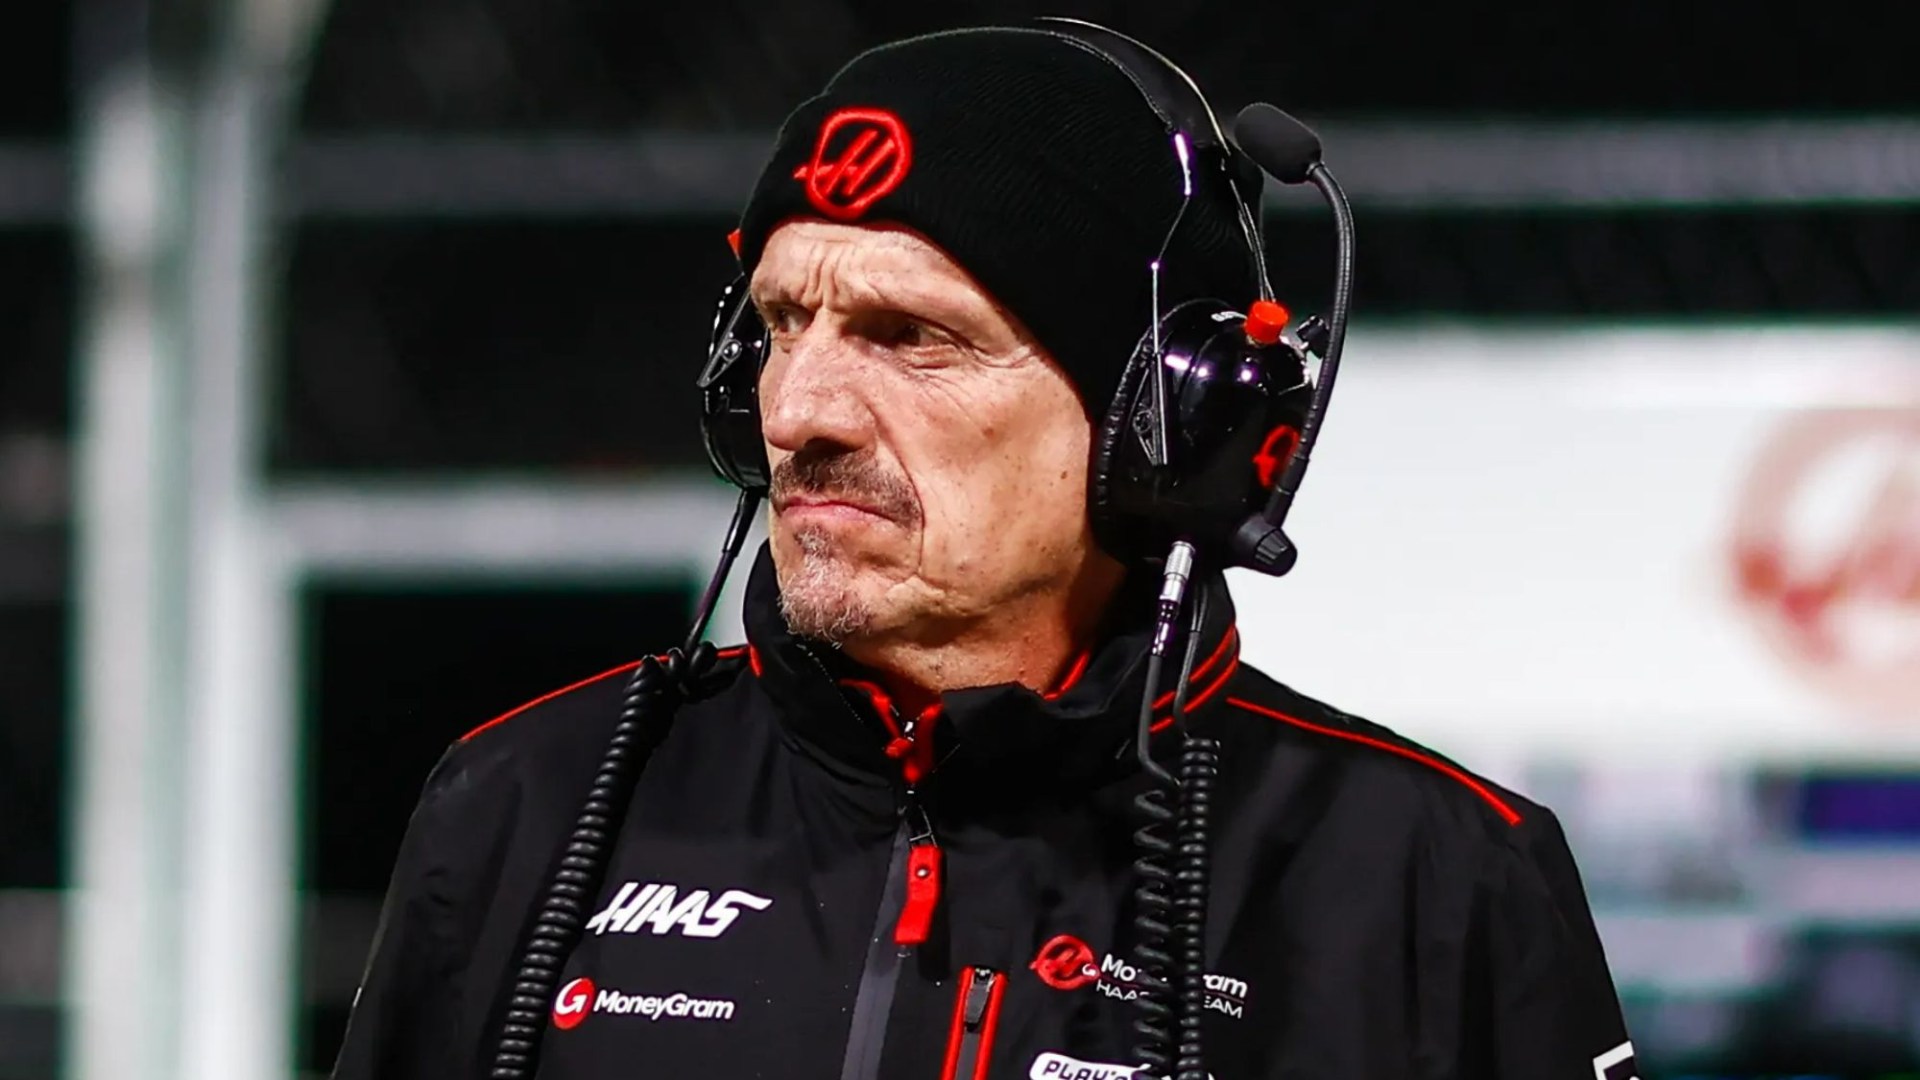 Drive to Survive and F1 legend Guenther Steiner set to give bombshell interview after shock Haas sacking